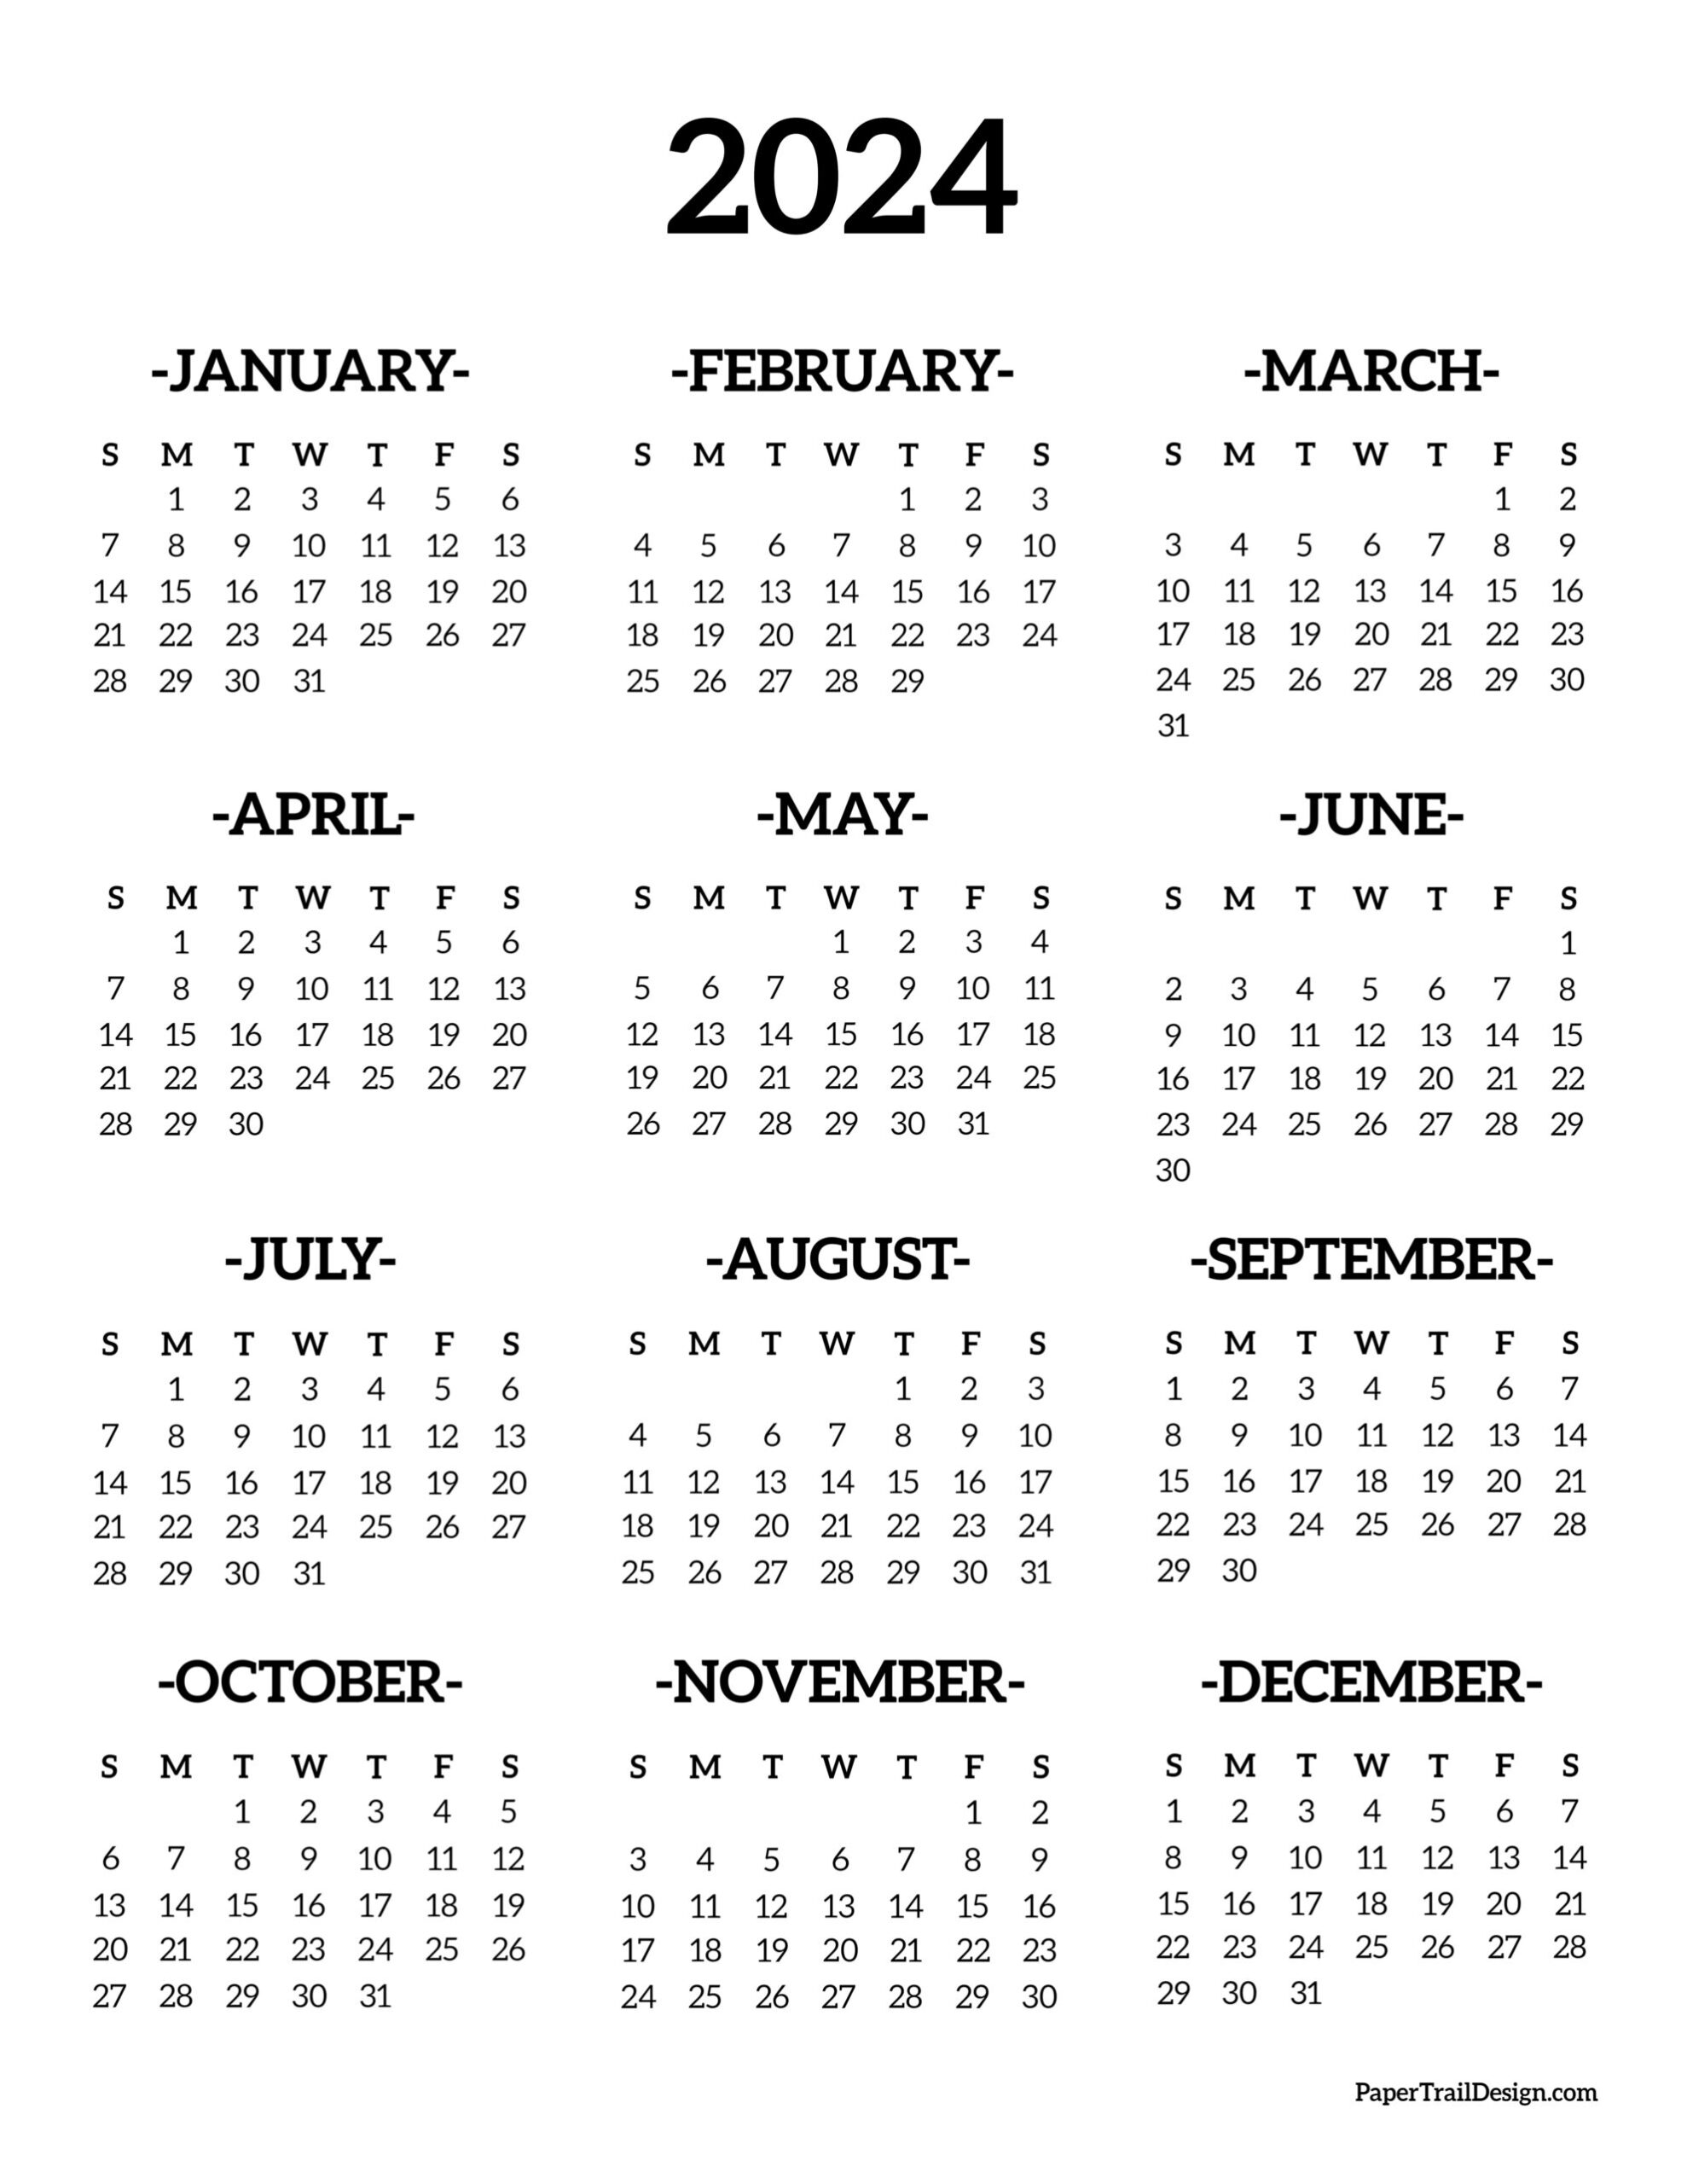 Calendar 2024 Printable One Page - Paper Trail Design for Free Printable Yearly Calendar 2024